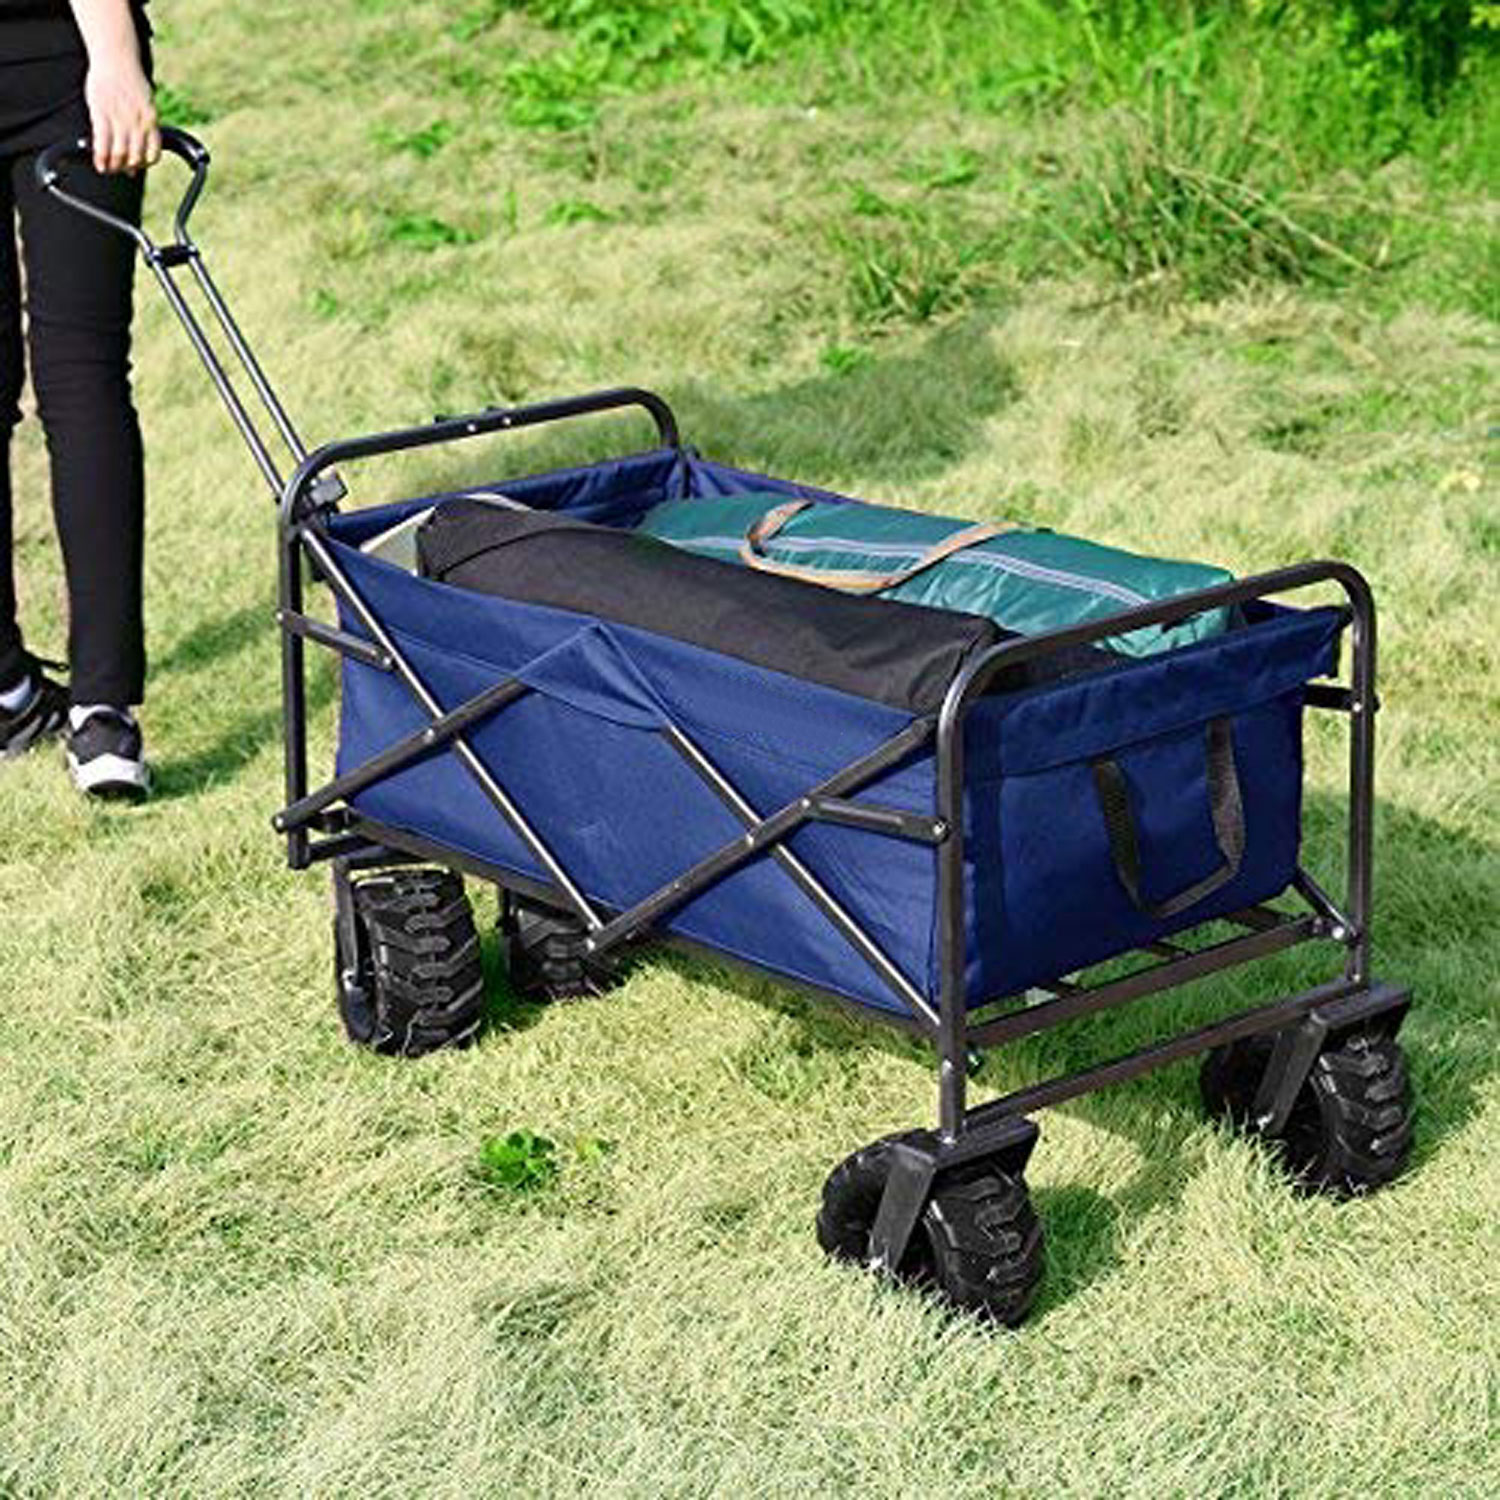 JAKAGO Collapsible Outdoor Utility Wagon Heavy Duty Folding Wagon Sturdy Garden Cart for Shopping Camping Beach Picnic with Adjustable Handle Blue 